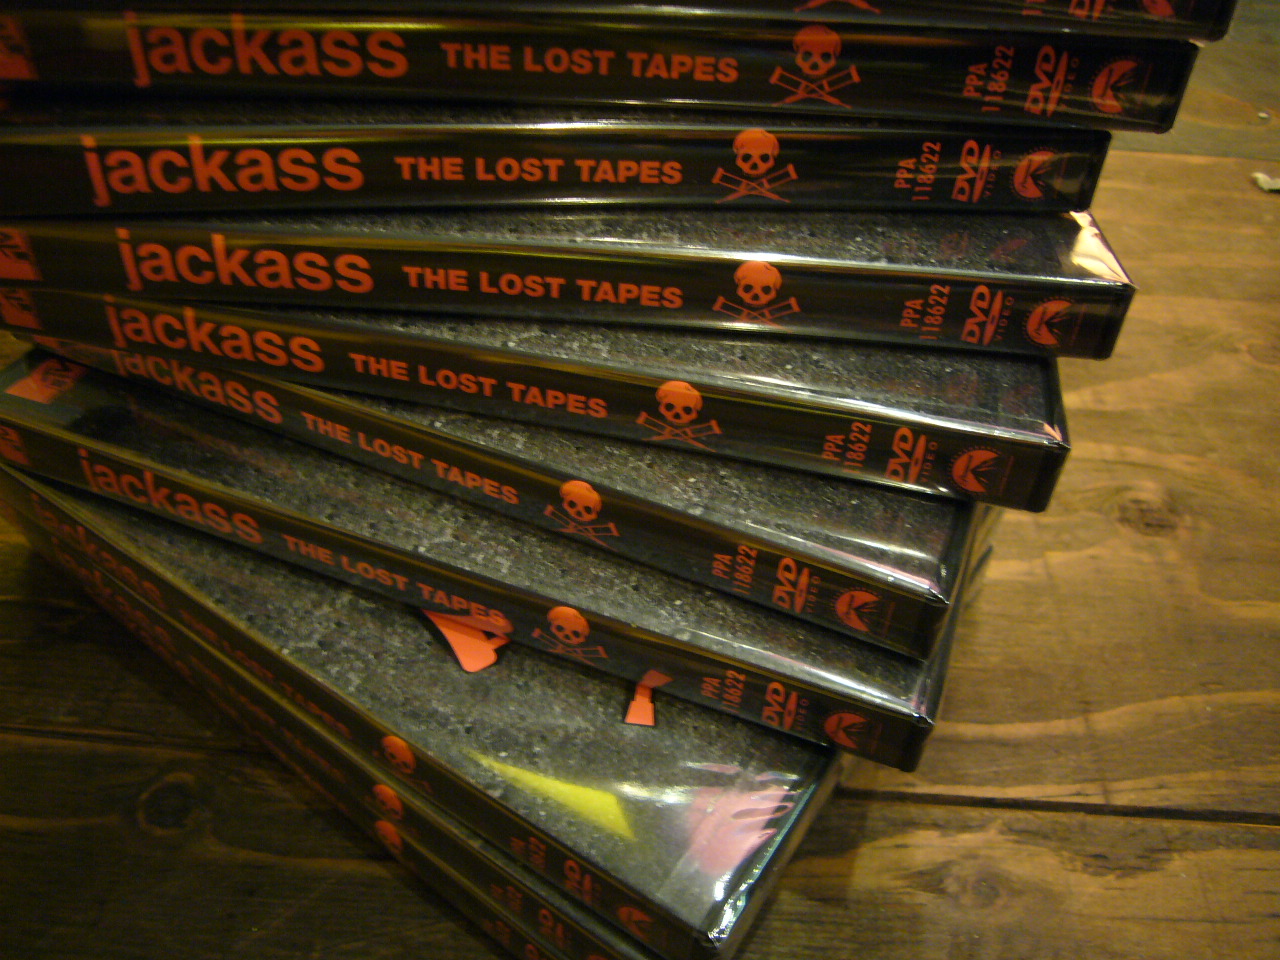 Jackass: The Lost Tapes #6